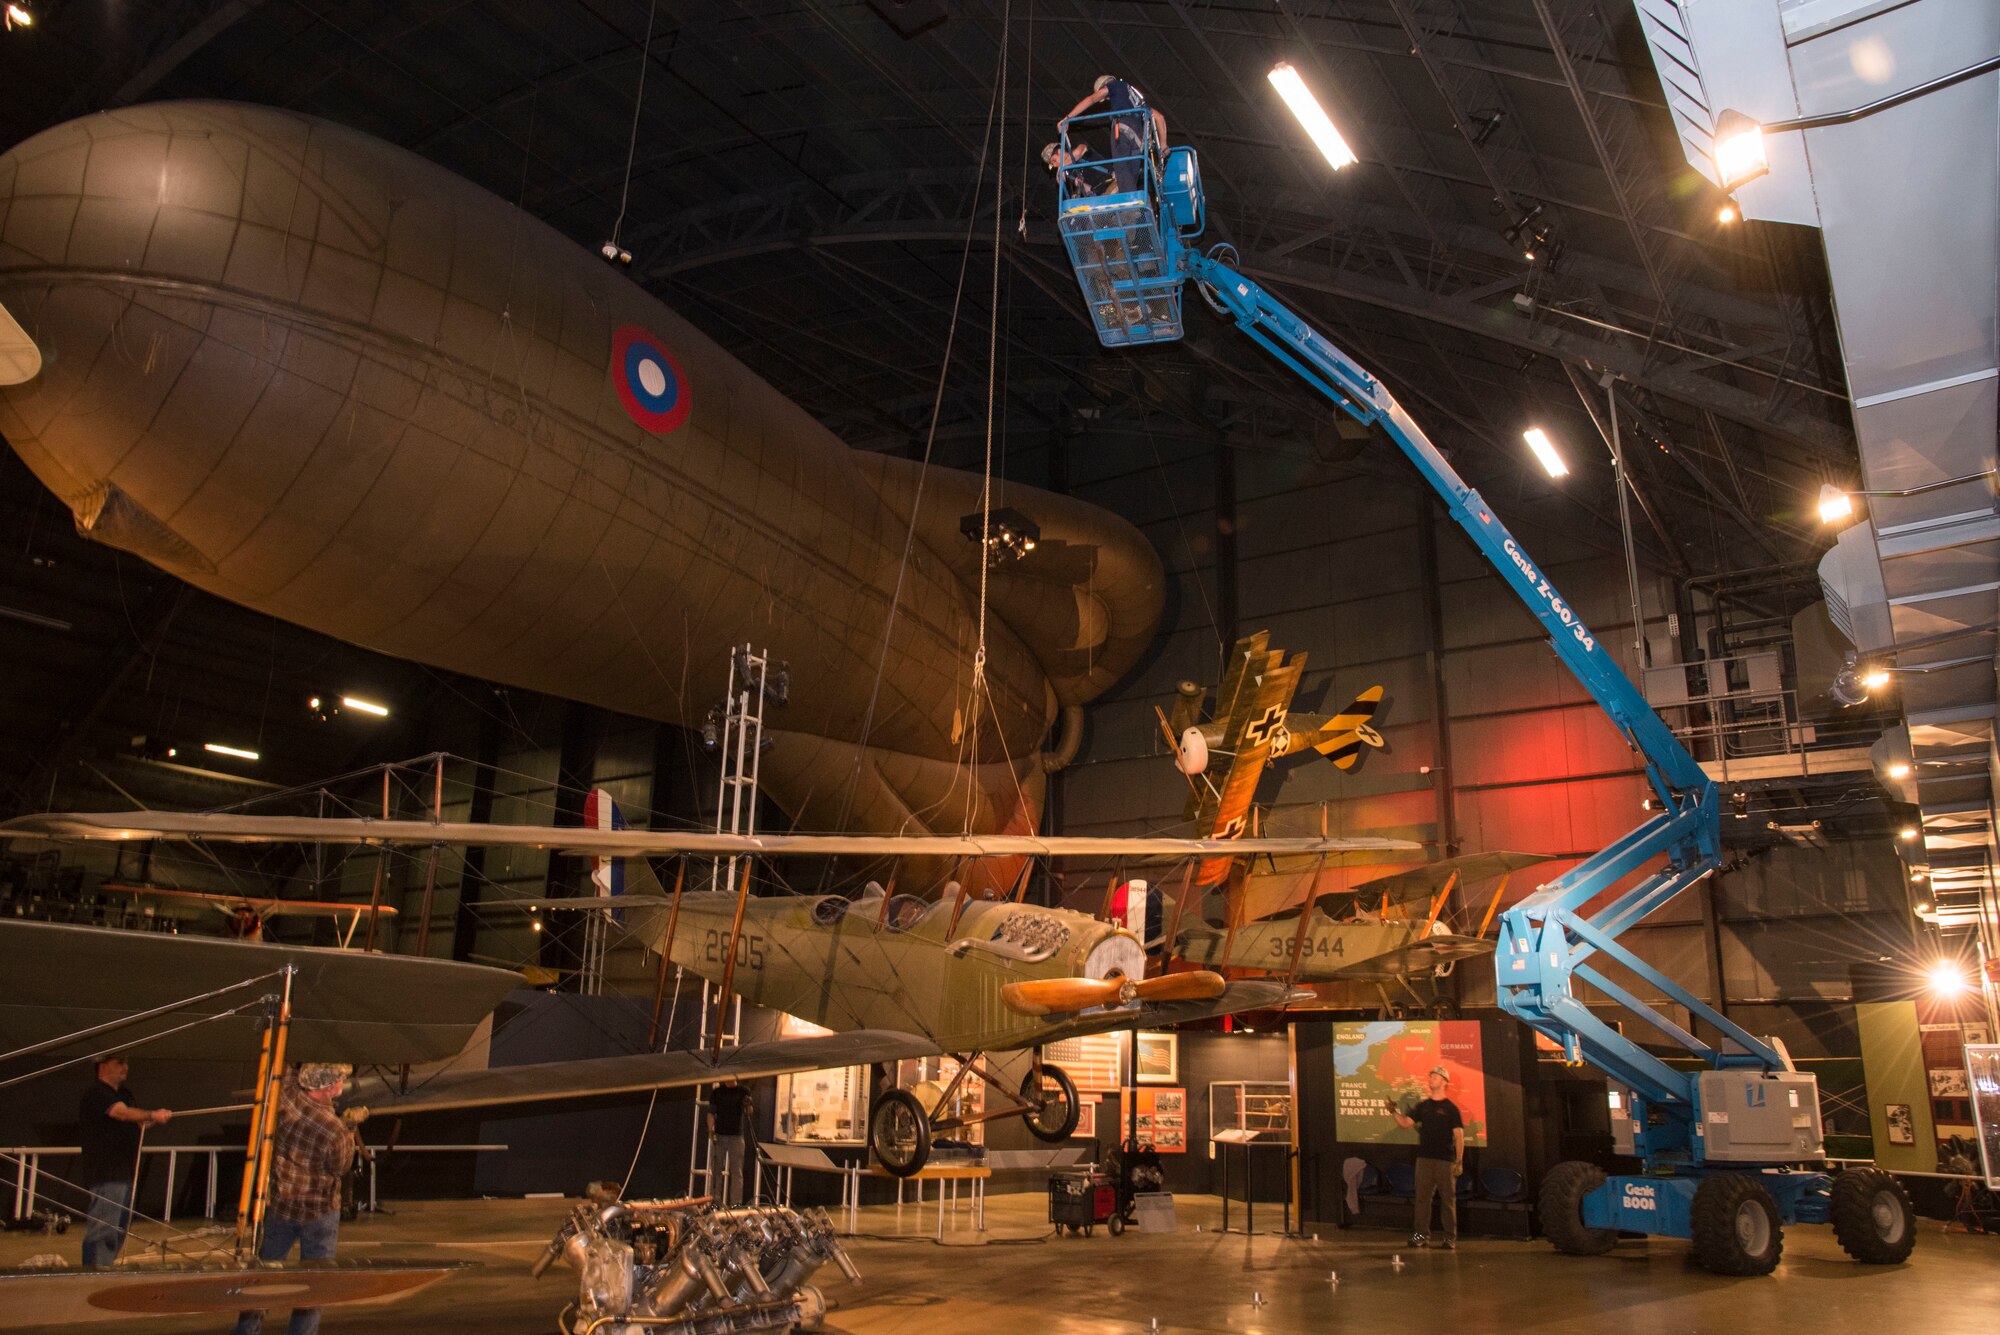 DAYTON, Ohio -- National Museum of the U.S. Air Force restoration crews lowered the Curtiss JN-4D Jenny from its hanging position on Nov. 7 2018 in the Early Years Gallery. Plans call for the Avro 504K to hang above the JN-4D after the restoration process is completed. (U.S. Air Force photo by Ken LaRock)